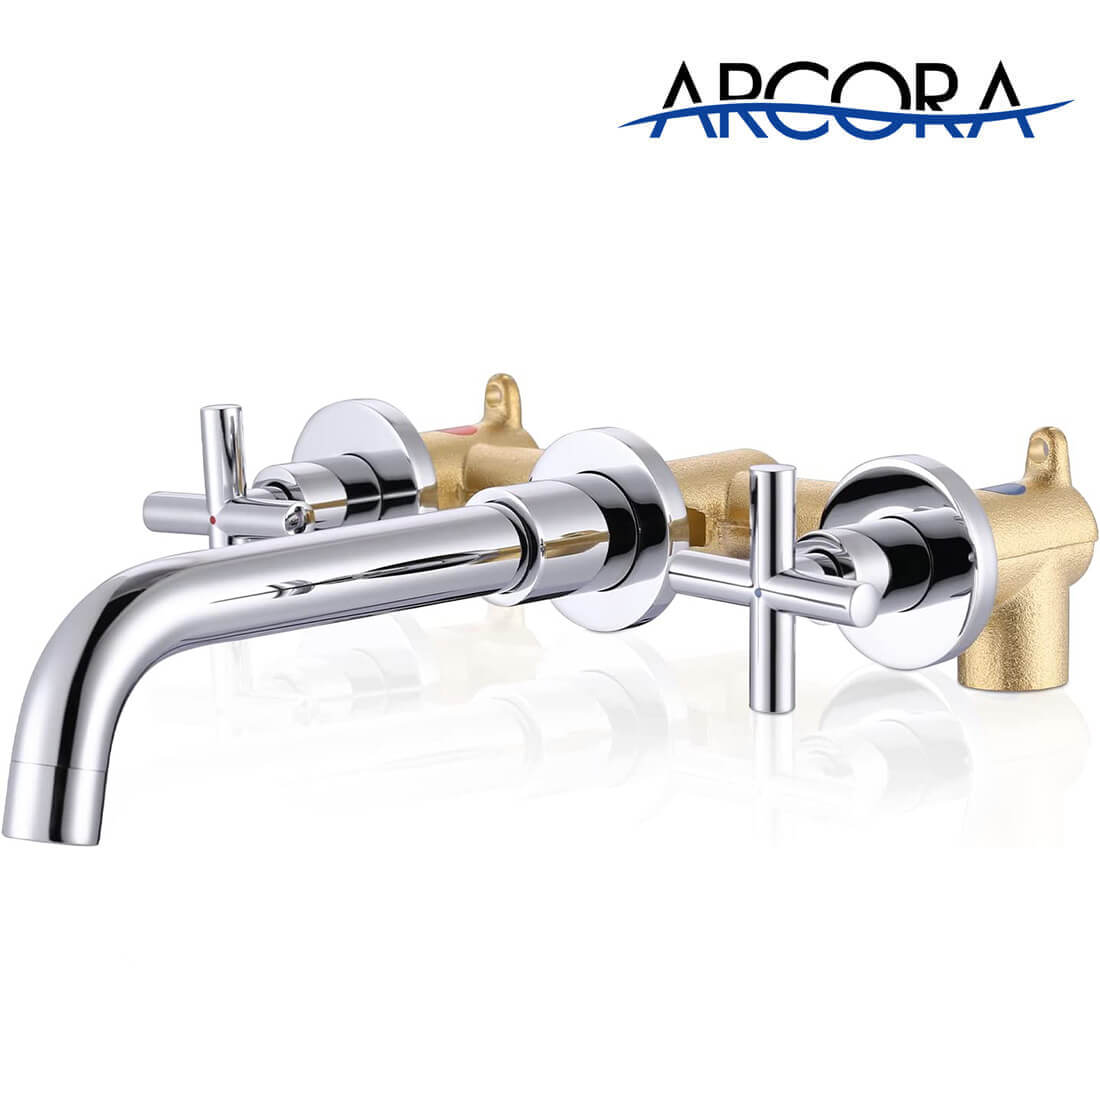 ARCORA 2 Cross Handle Chrome Wall Mounted Bathroom Sink Faucet Rough in Valve Included